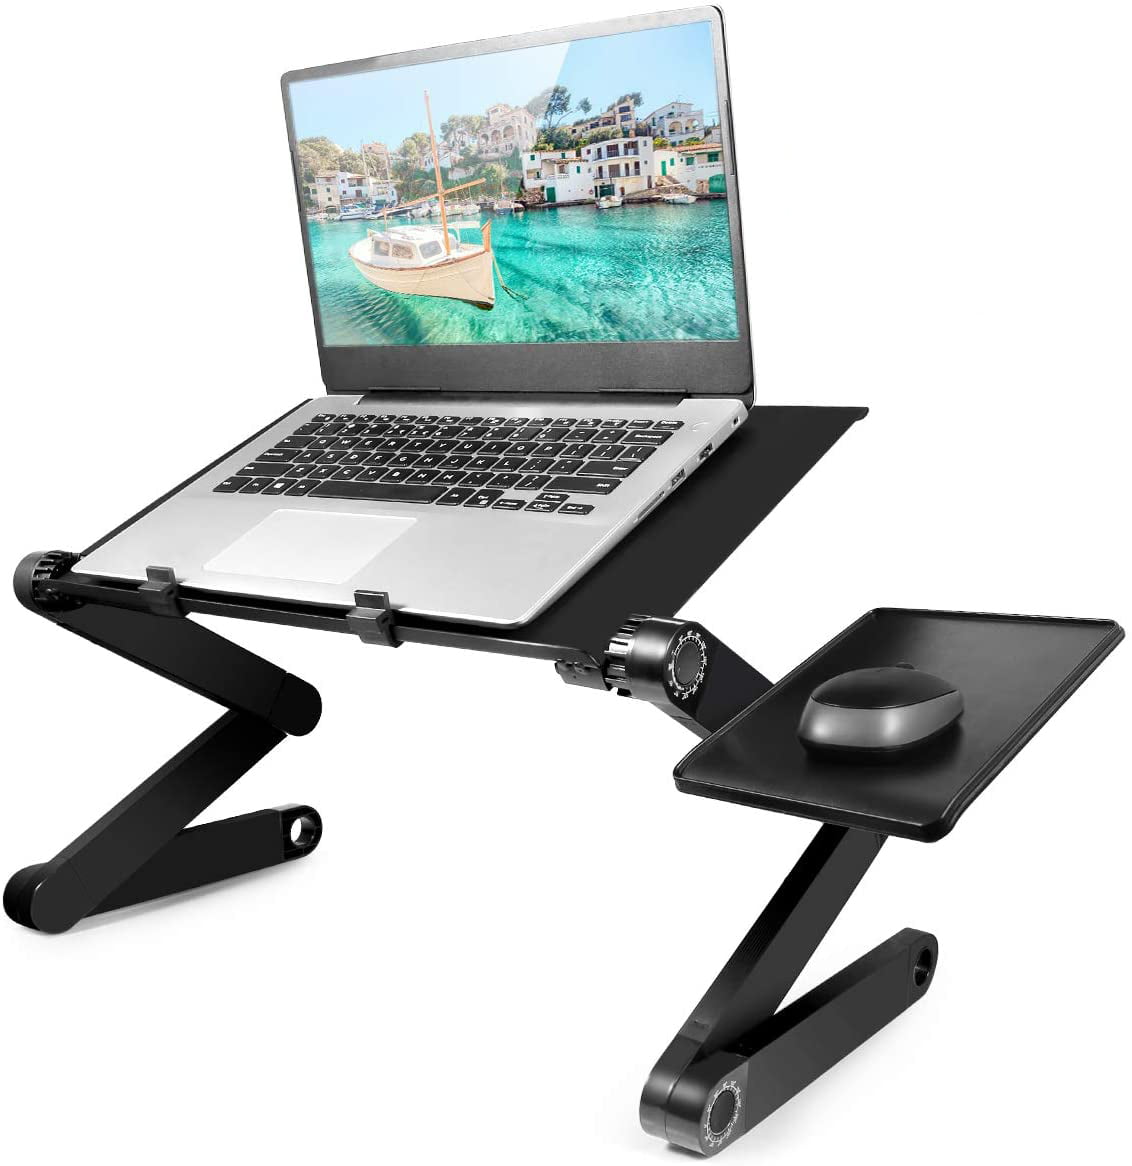 Portable Folding Laptop Desk Adjustable Computer Table Stand Tray For Bed Sofa 